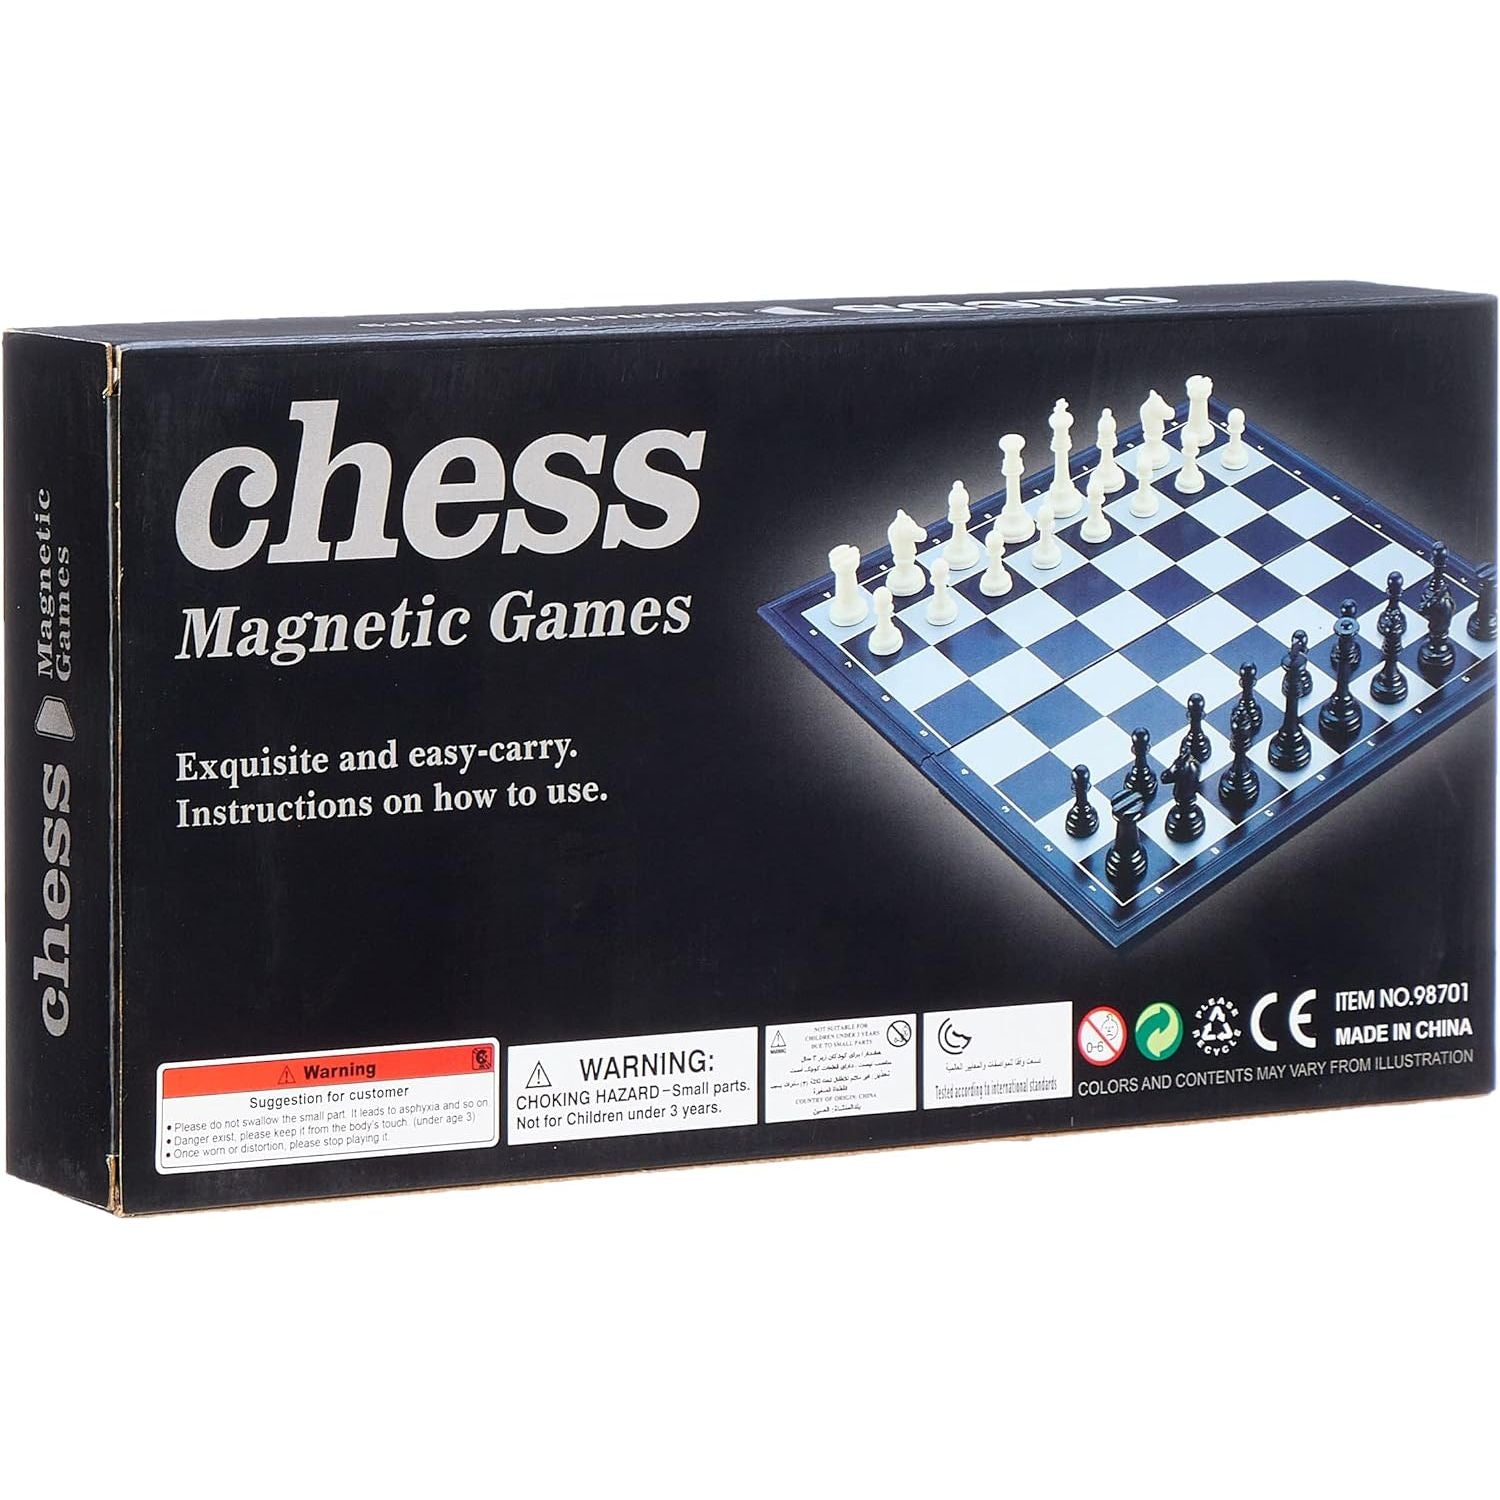 International Chess Set Game For Adult 98701 Multi Color